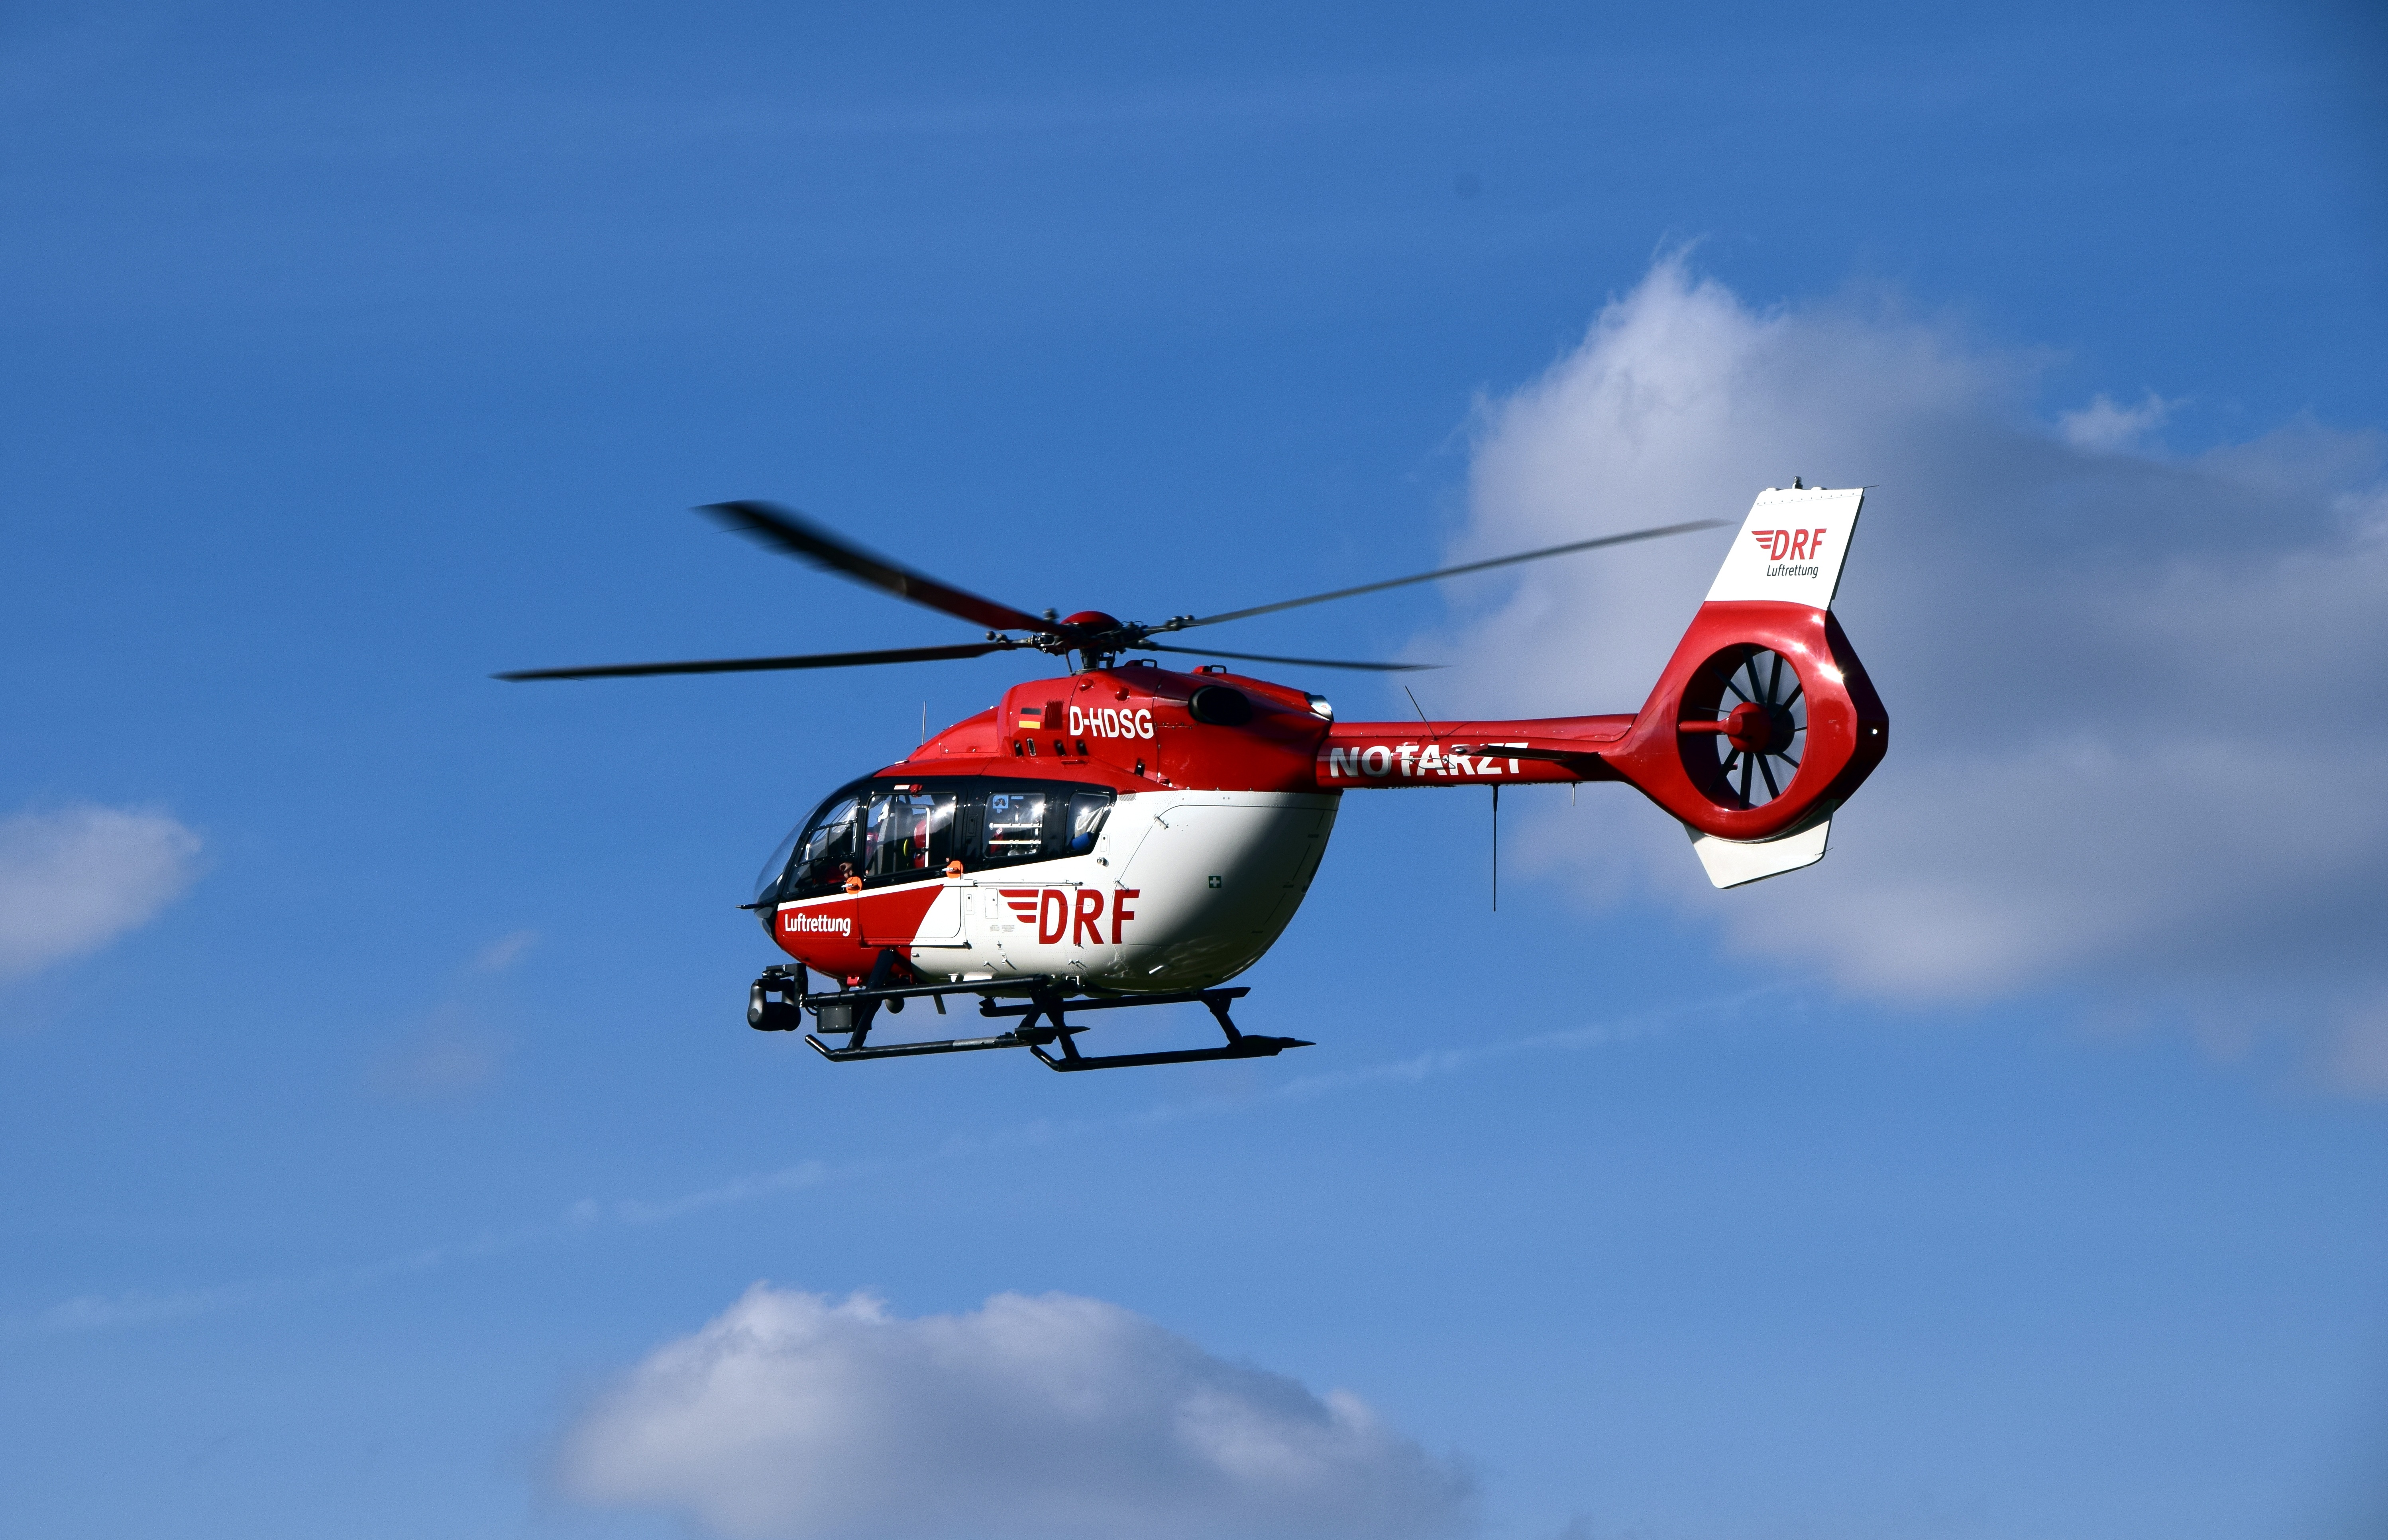 helicopter, miscellaneous, sky, miscellanea, flight, ambulance Full HD